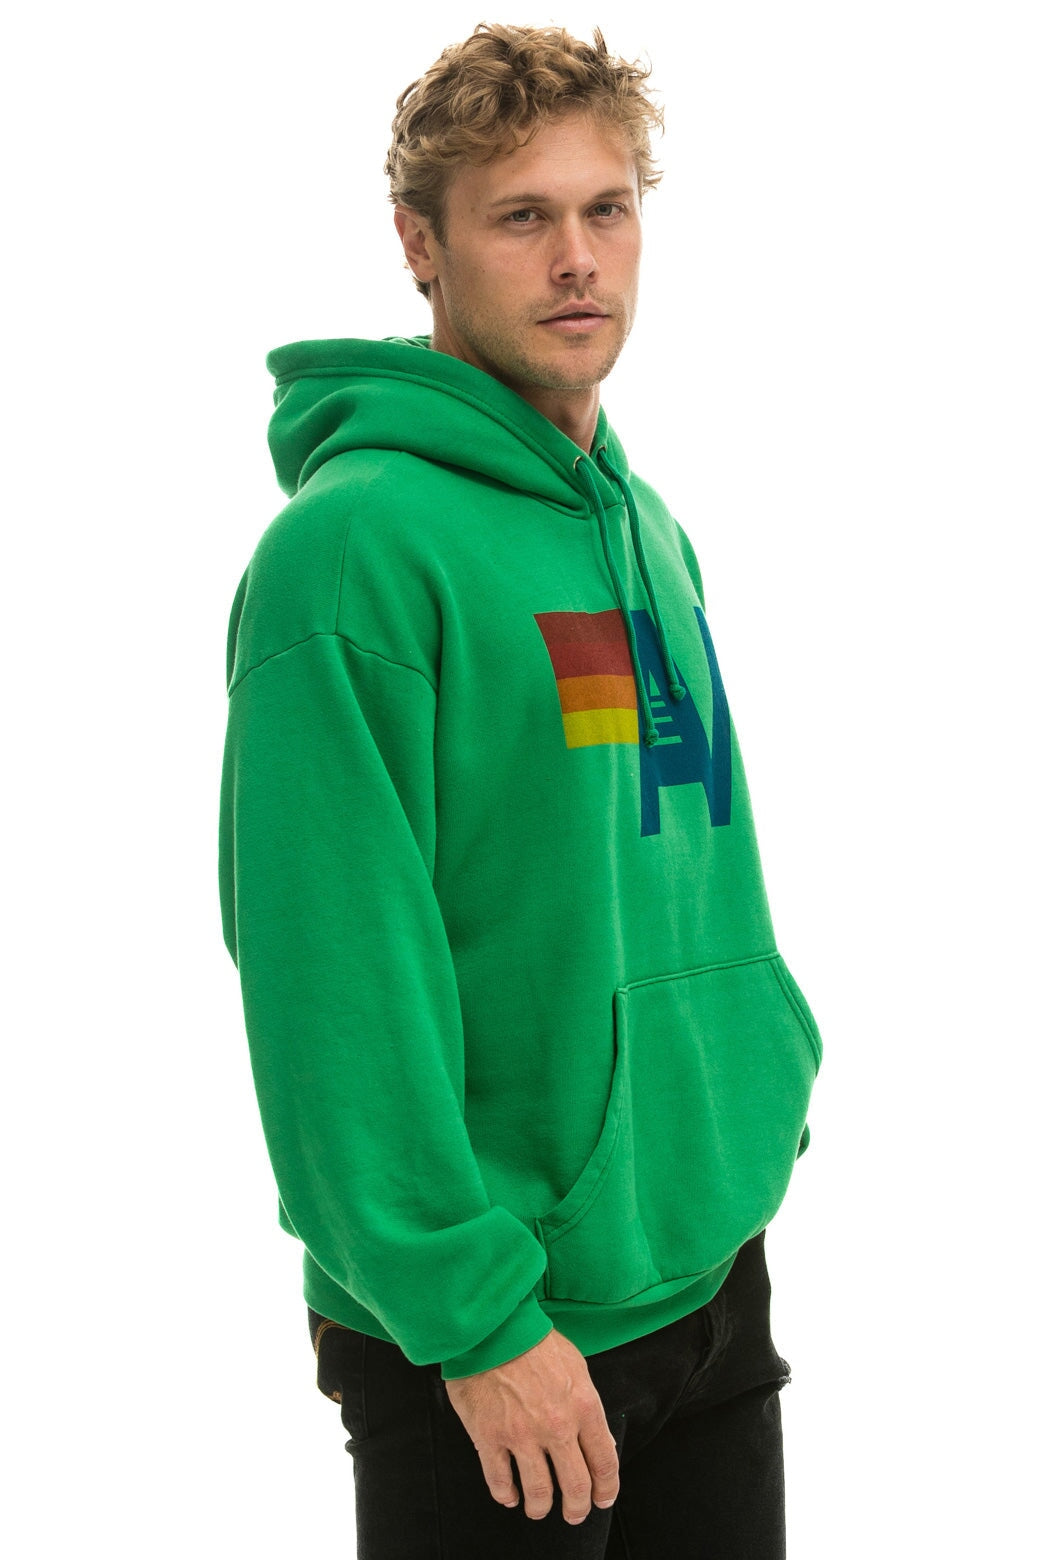 LOGO PULLOVER RELAXED HOODIE - KELLY GREEN Hoodie Aviator Nation 